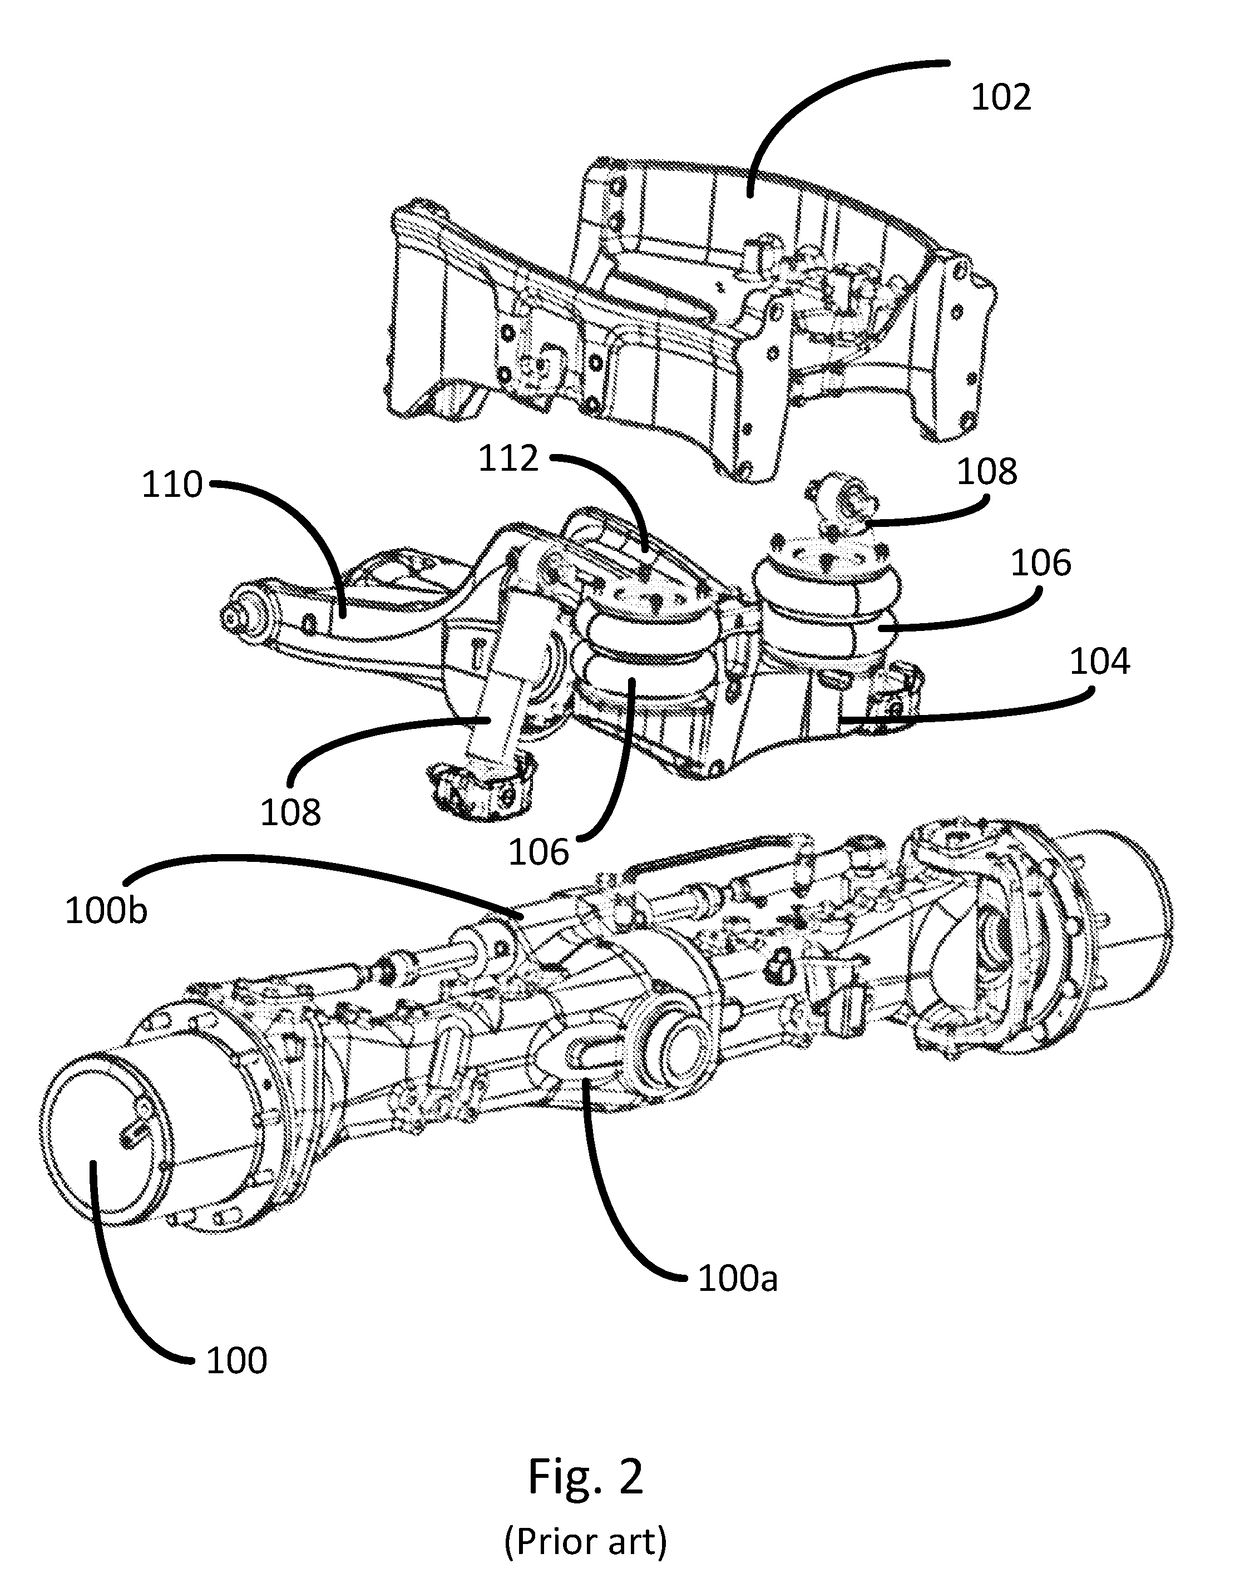 Axle suspension system for a tractor